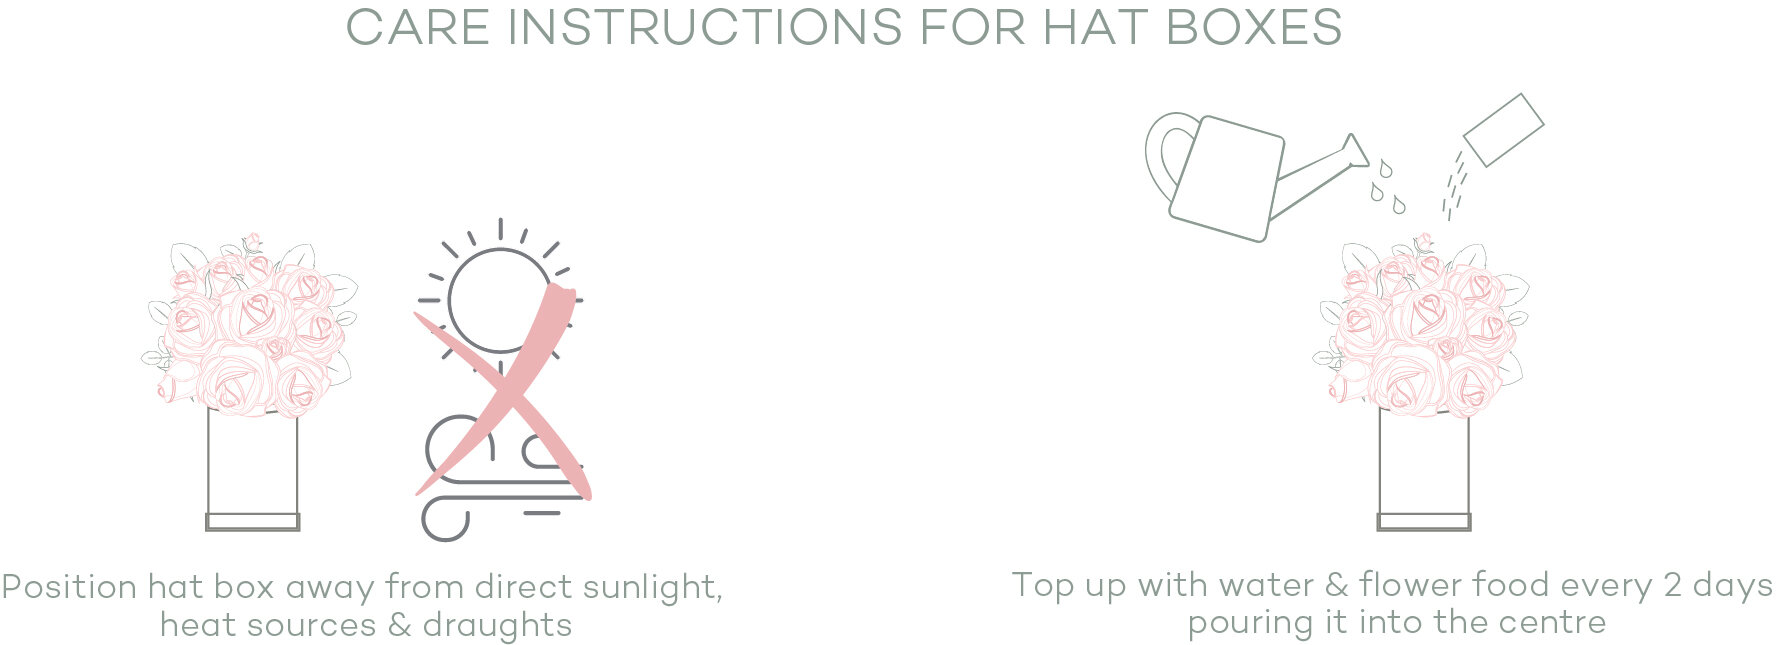 Care Instructions for Hat Boxes.jpg